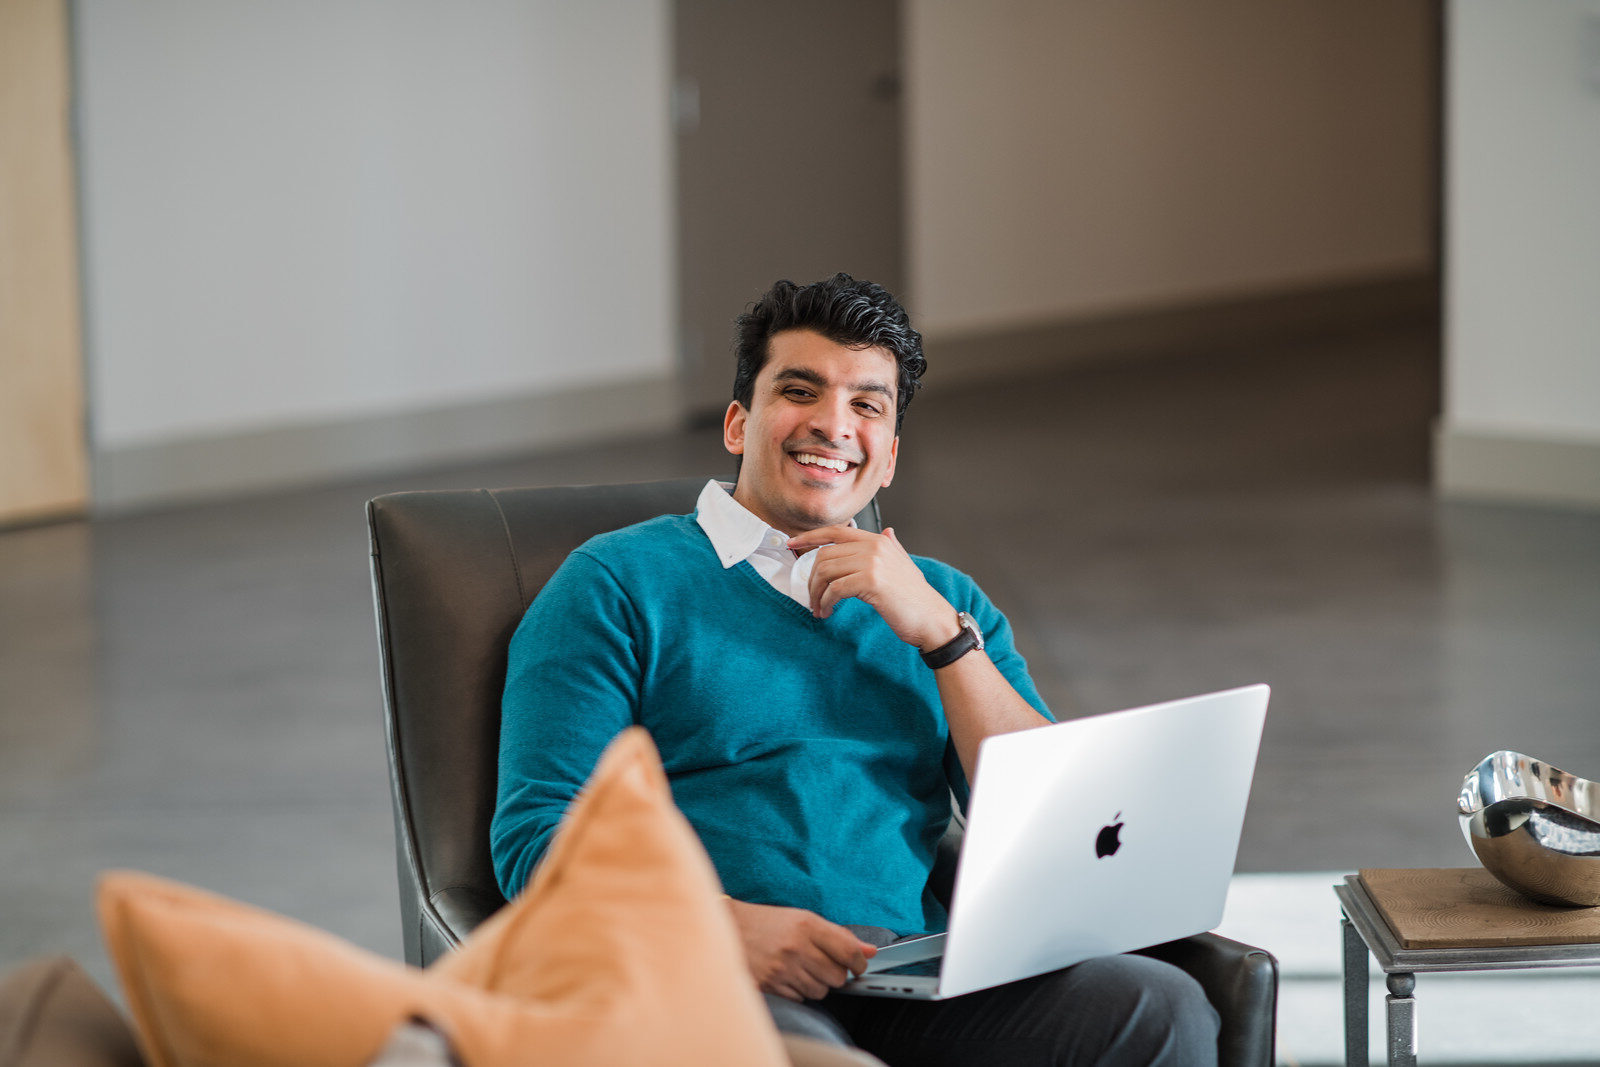 Business professional smiling with laptop in lobby